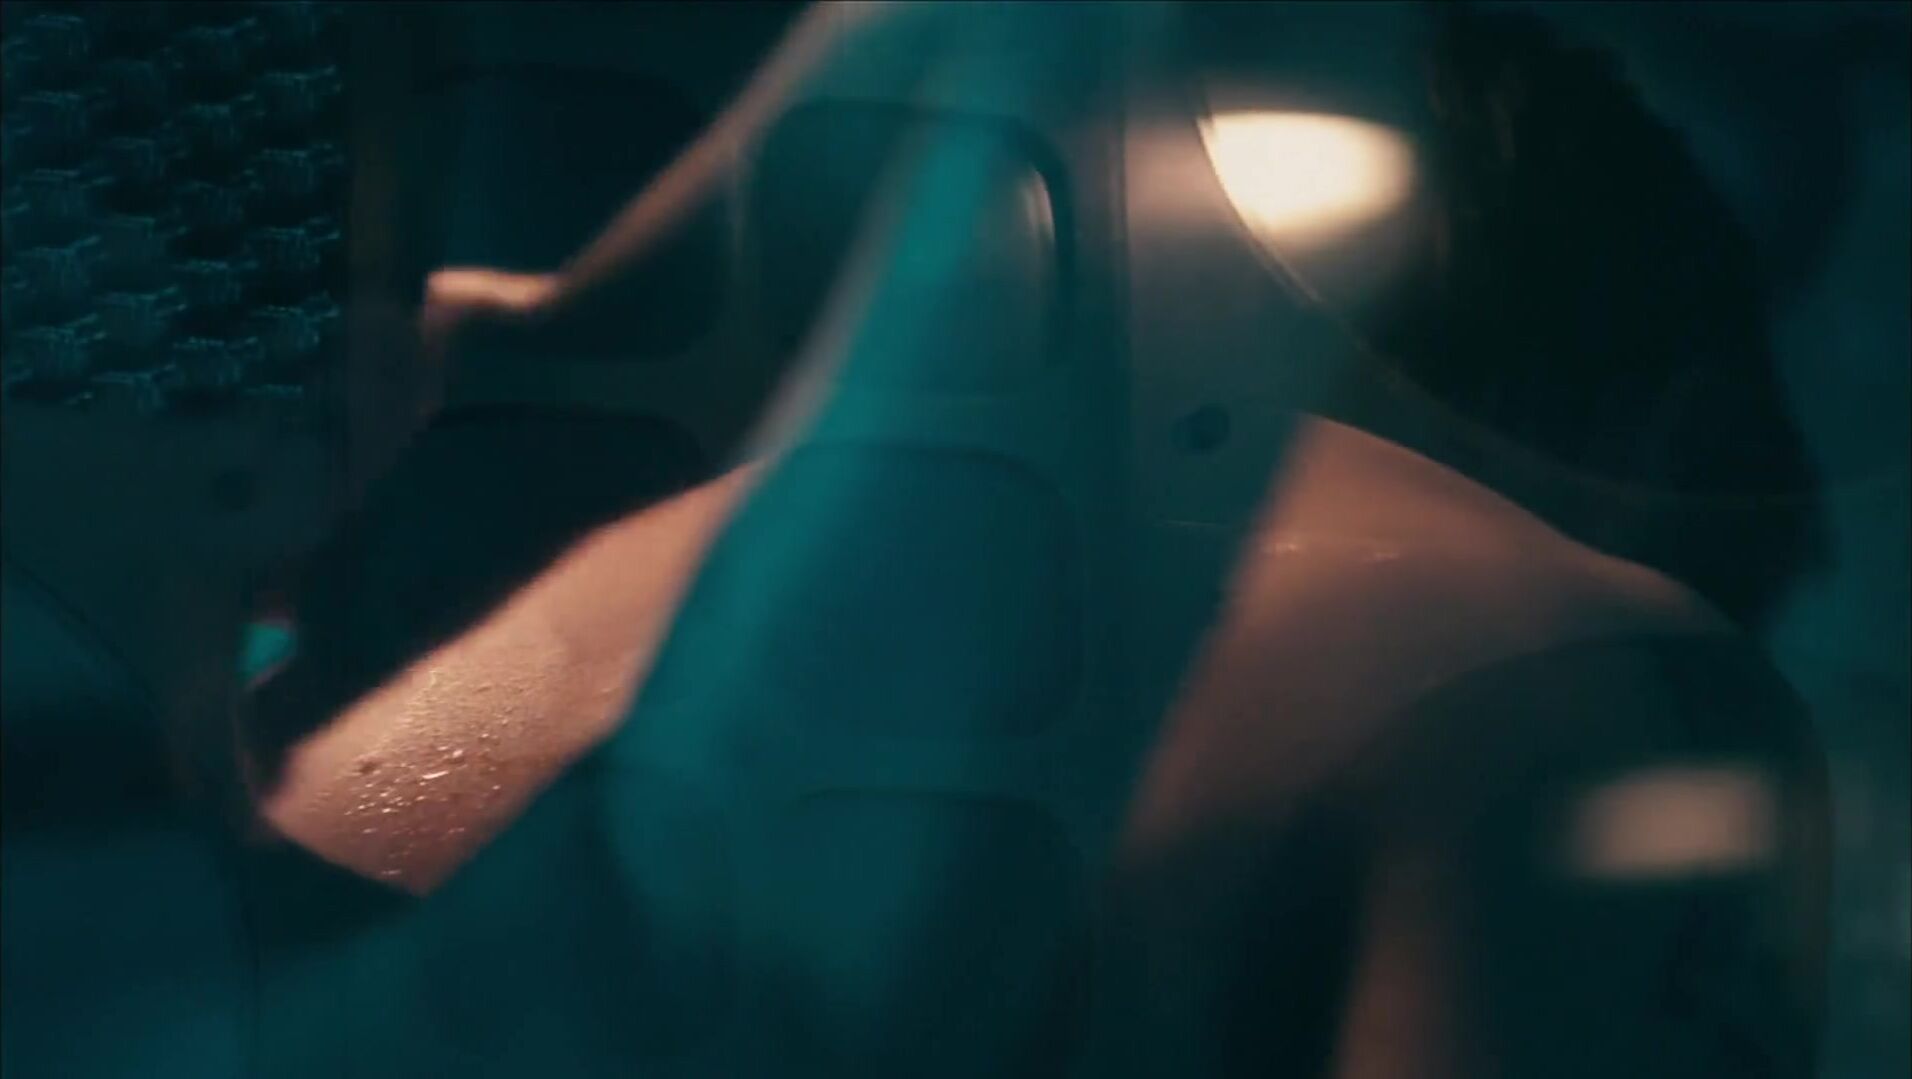 Price Michelle Williams receives different cocks and even gets creampied in Blue Valentine (2010) Shavedpussy